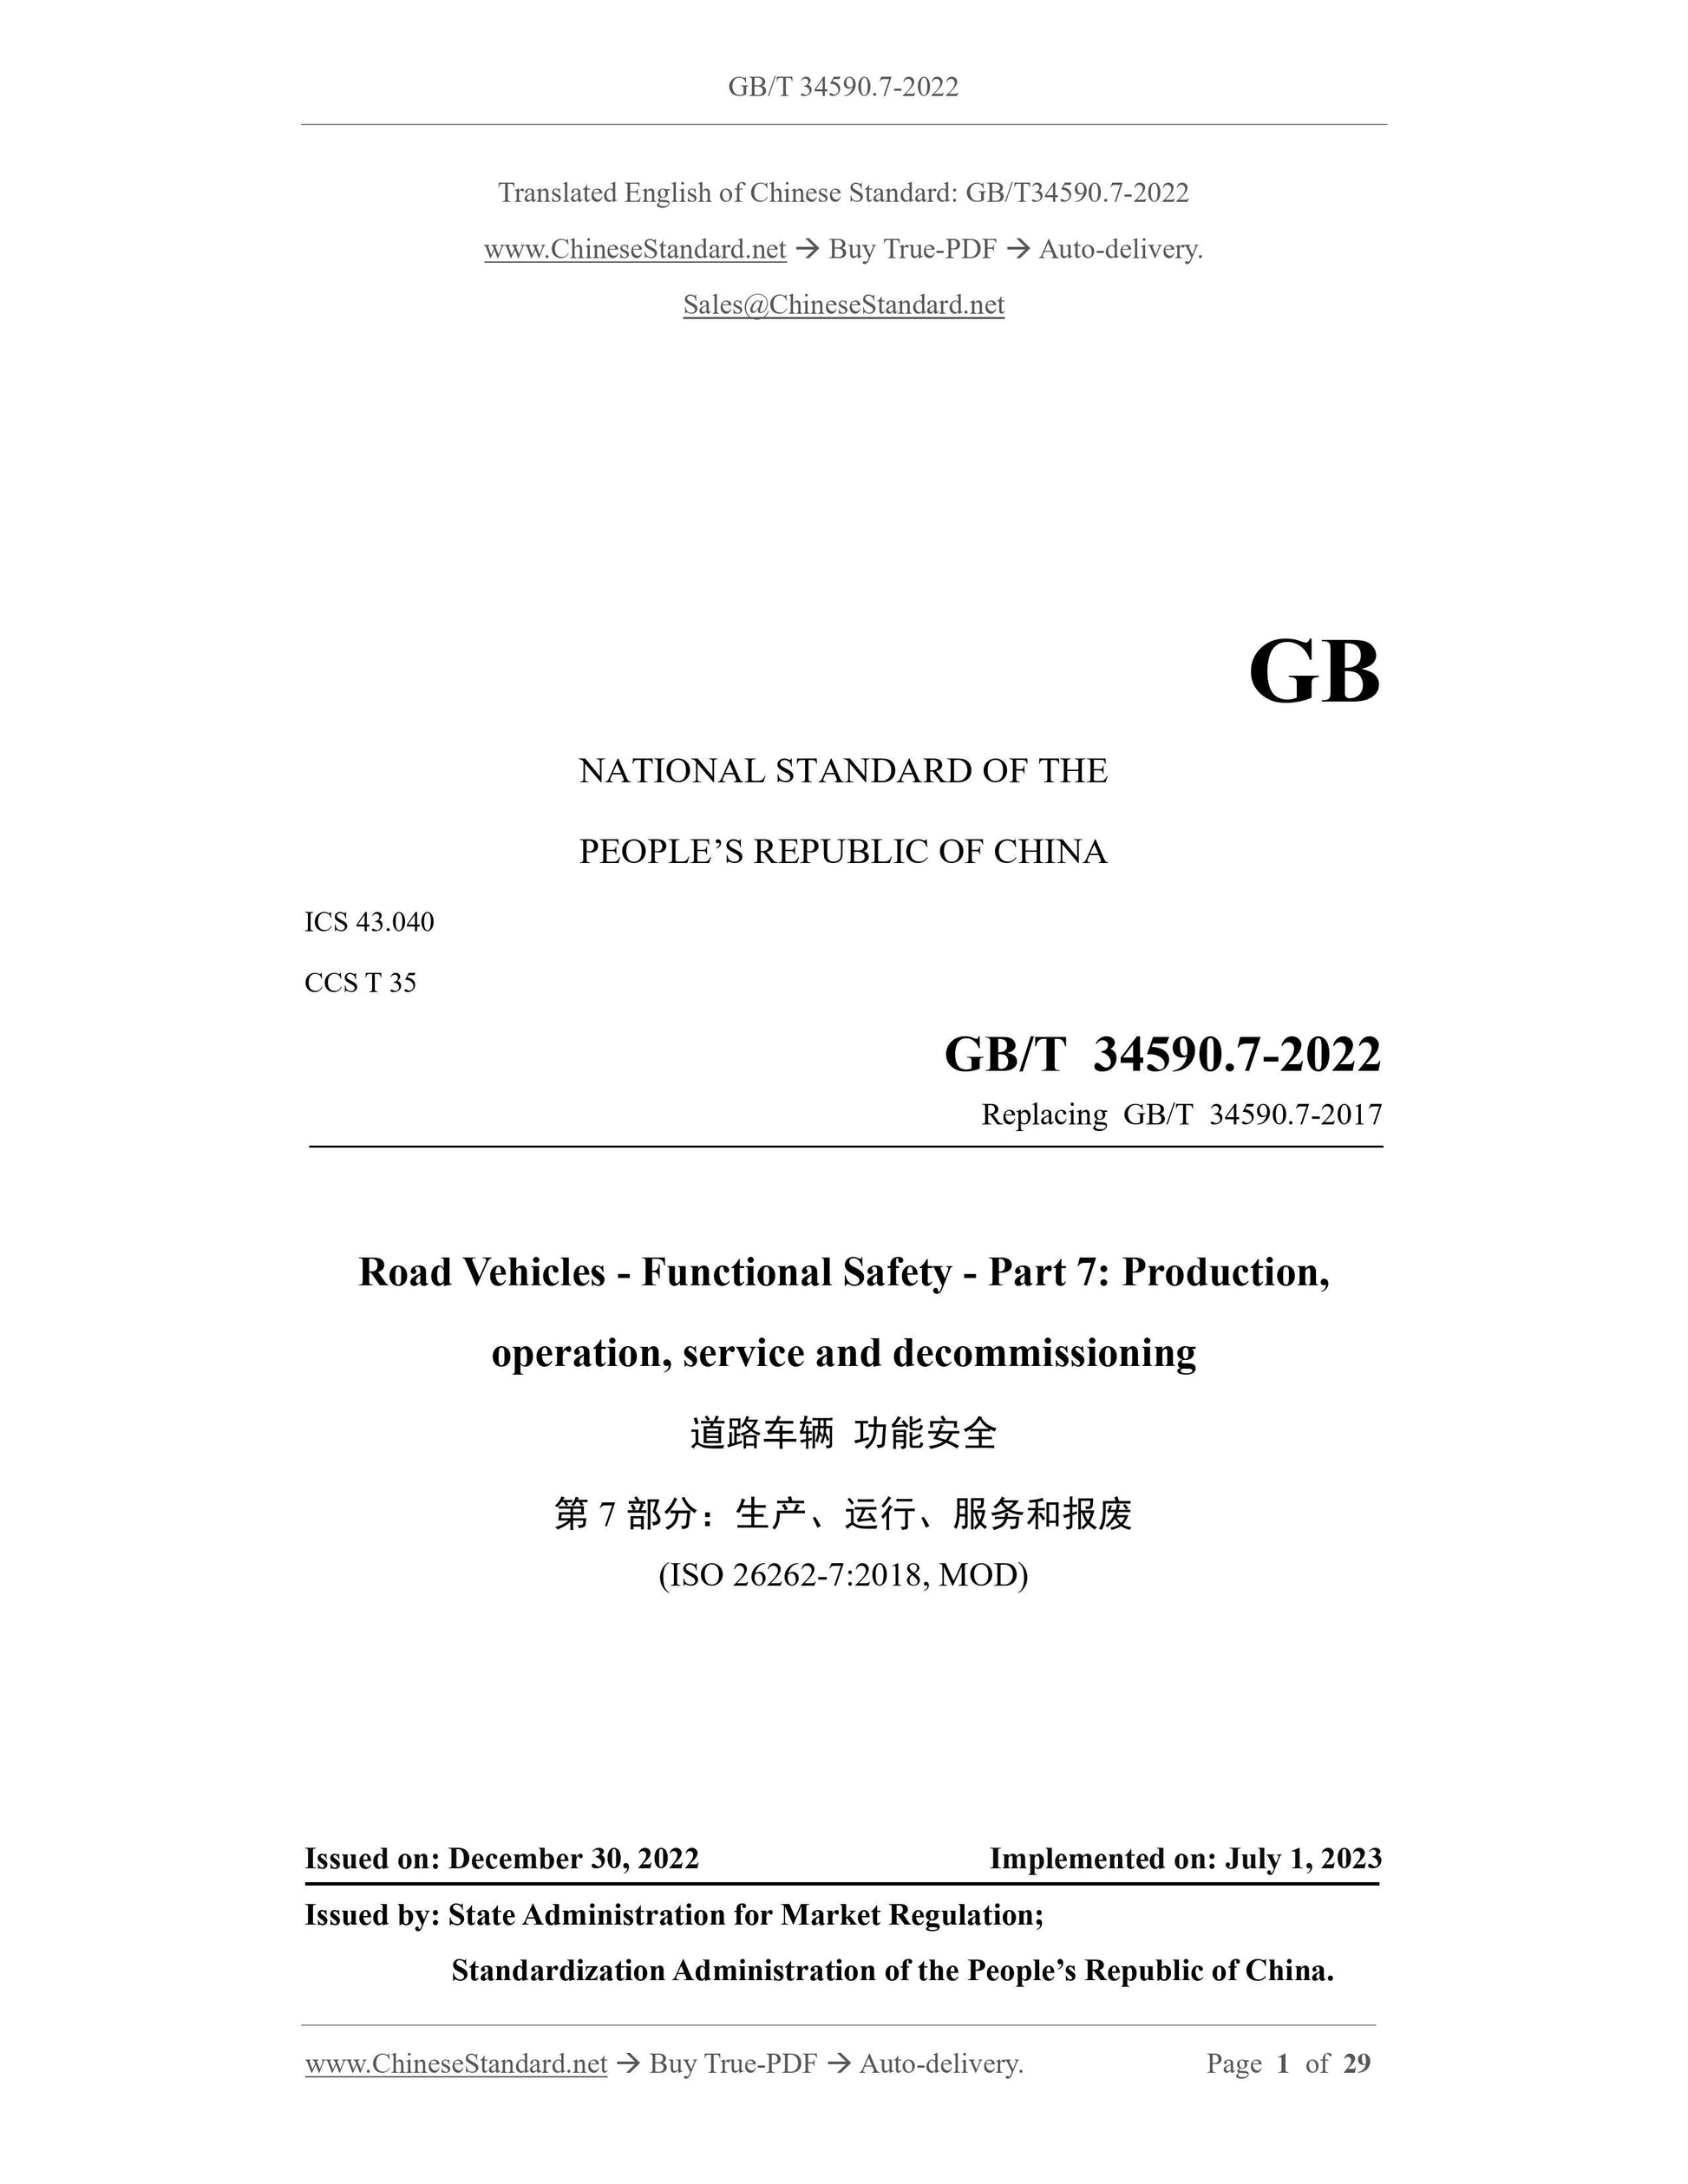 GB/T 34590.7-2022 Page 1